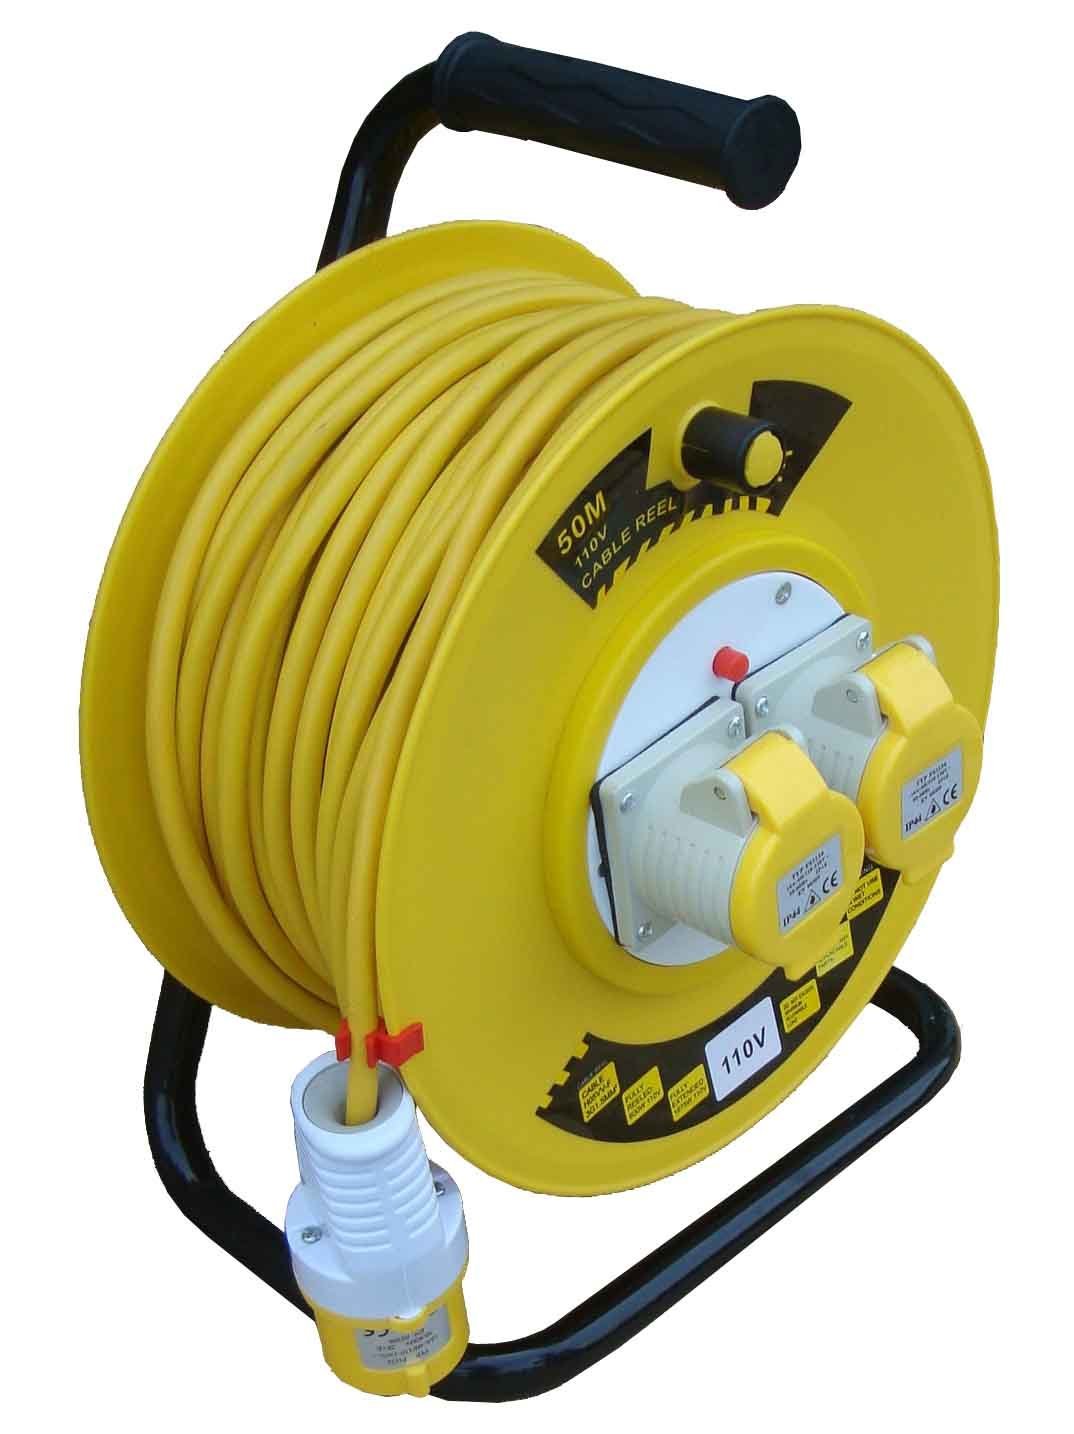 110v 16A 50mtr cable reel - Buy plastic cable reel, extension cord reel ...